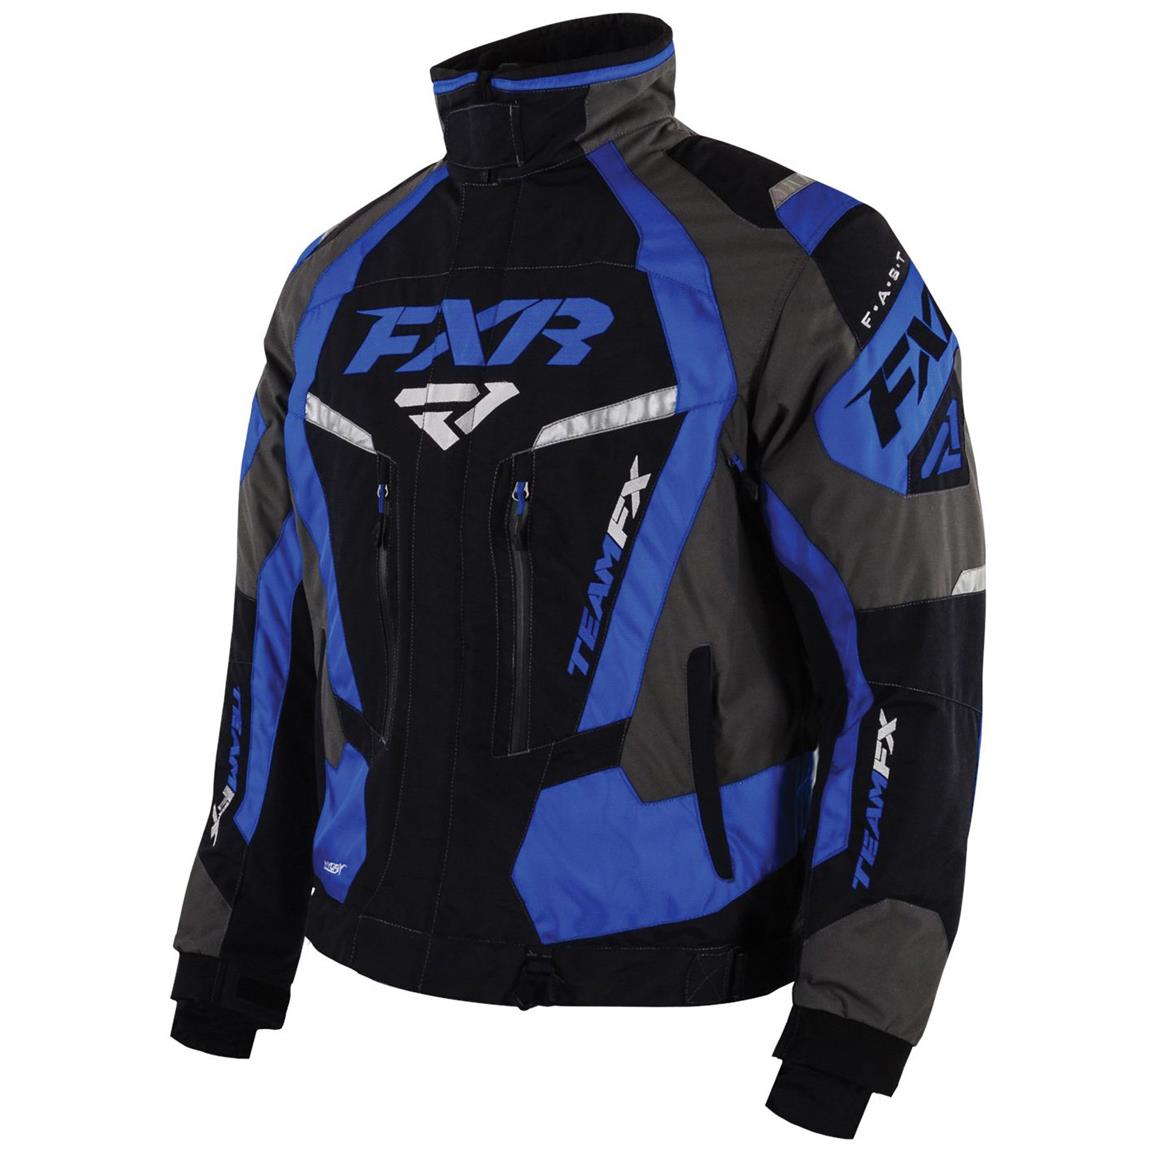 FXR Team FX Jacket - 627782, Snowmobile Clothing at Sportsman's Guide